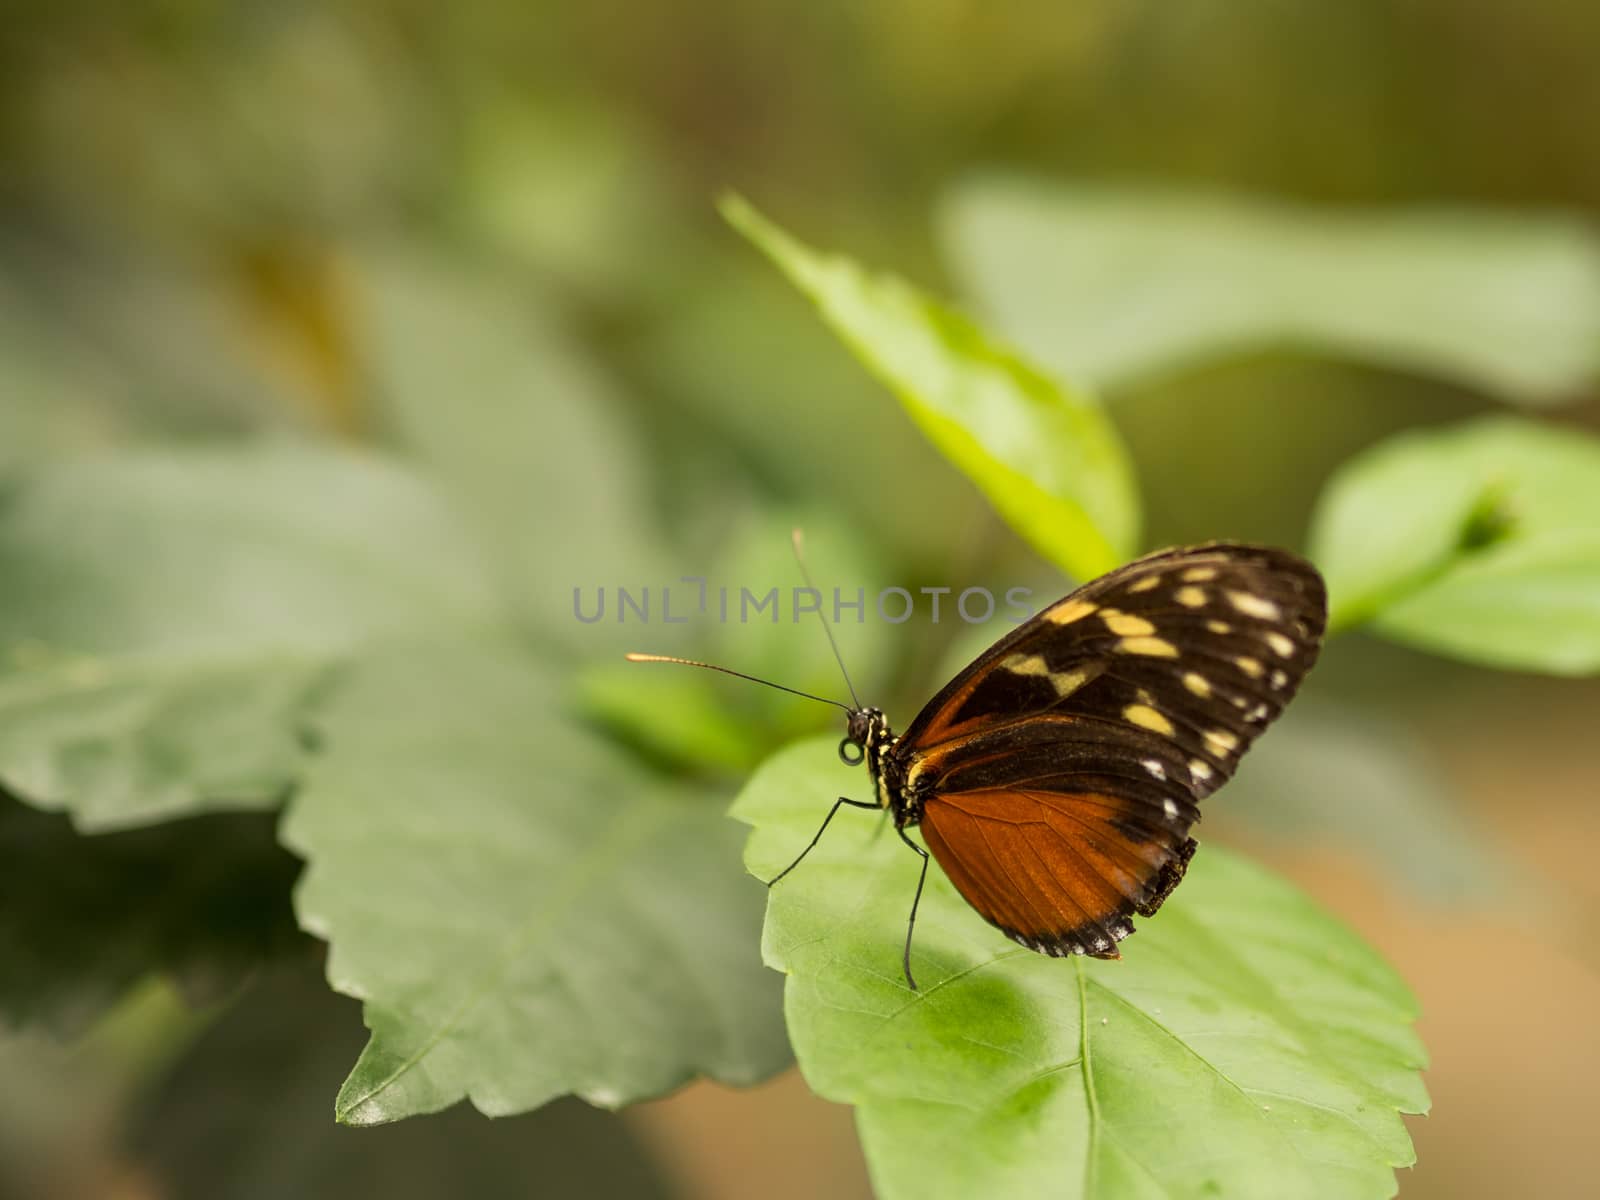 Simple butterfly on a leaf by frankhoekzema